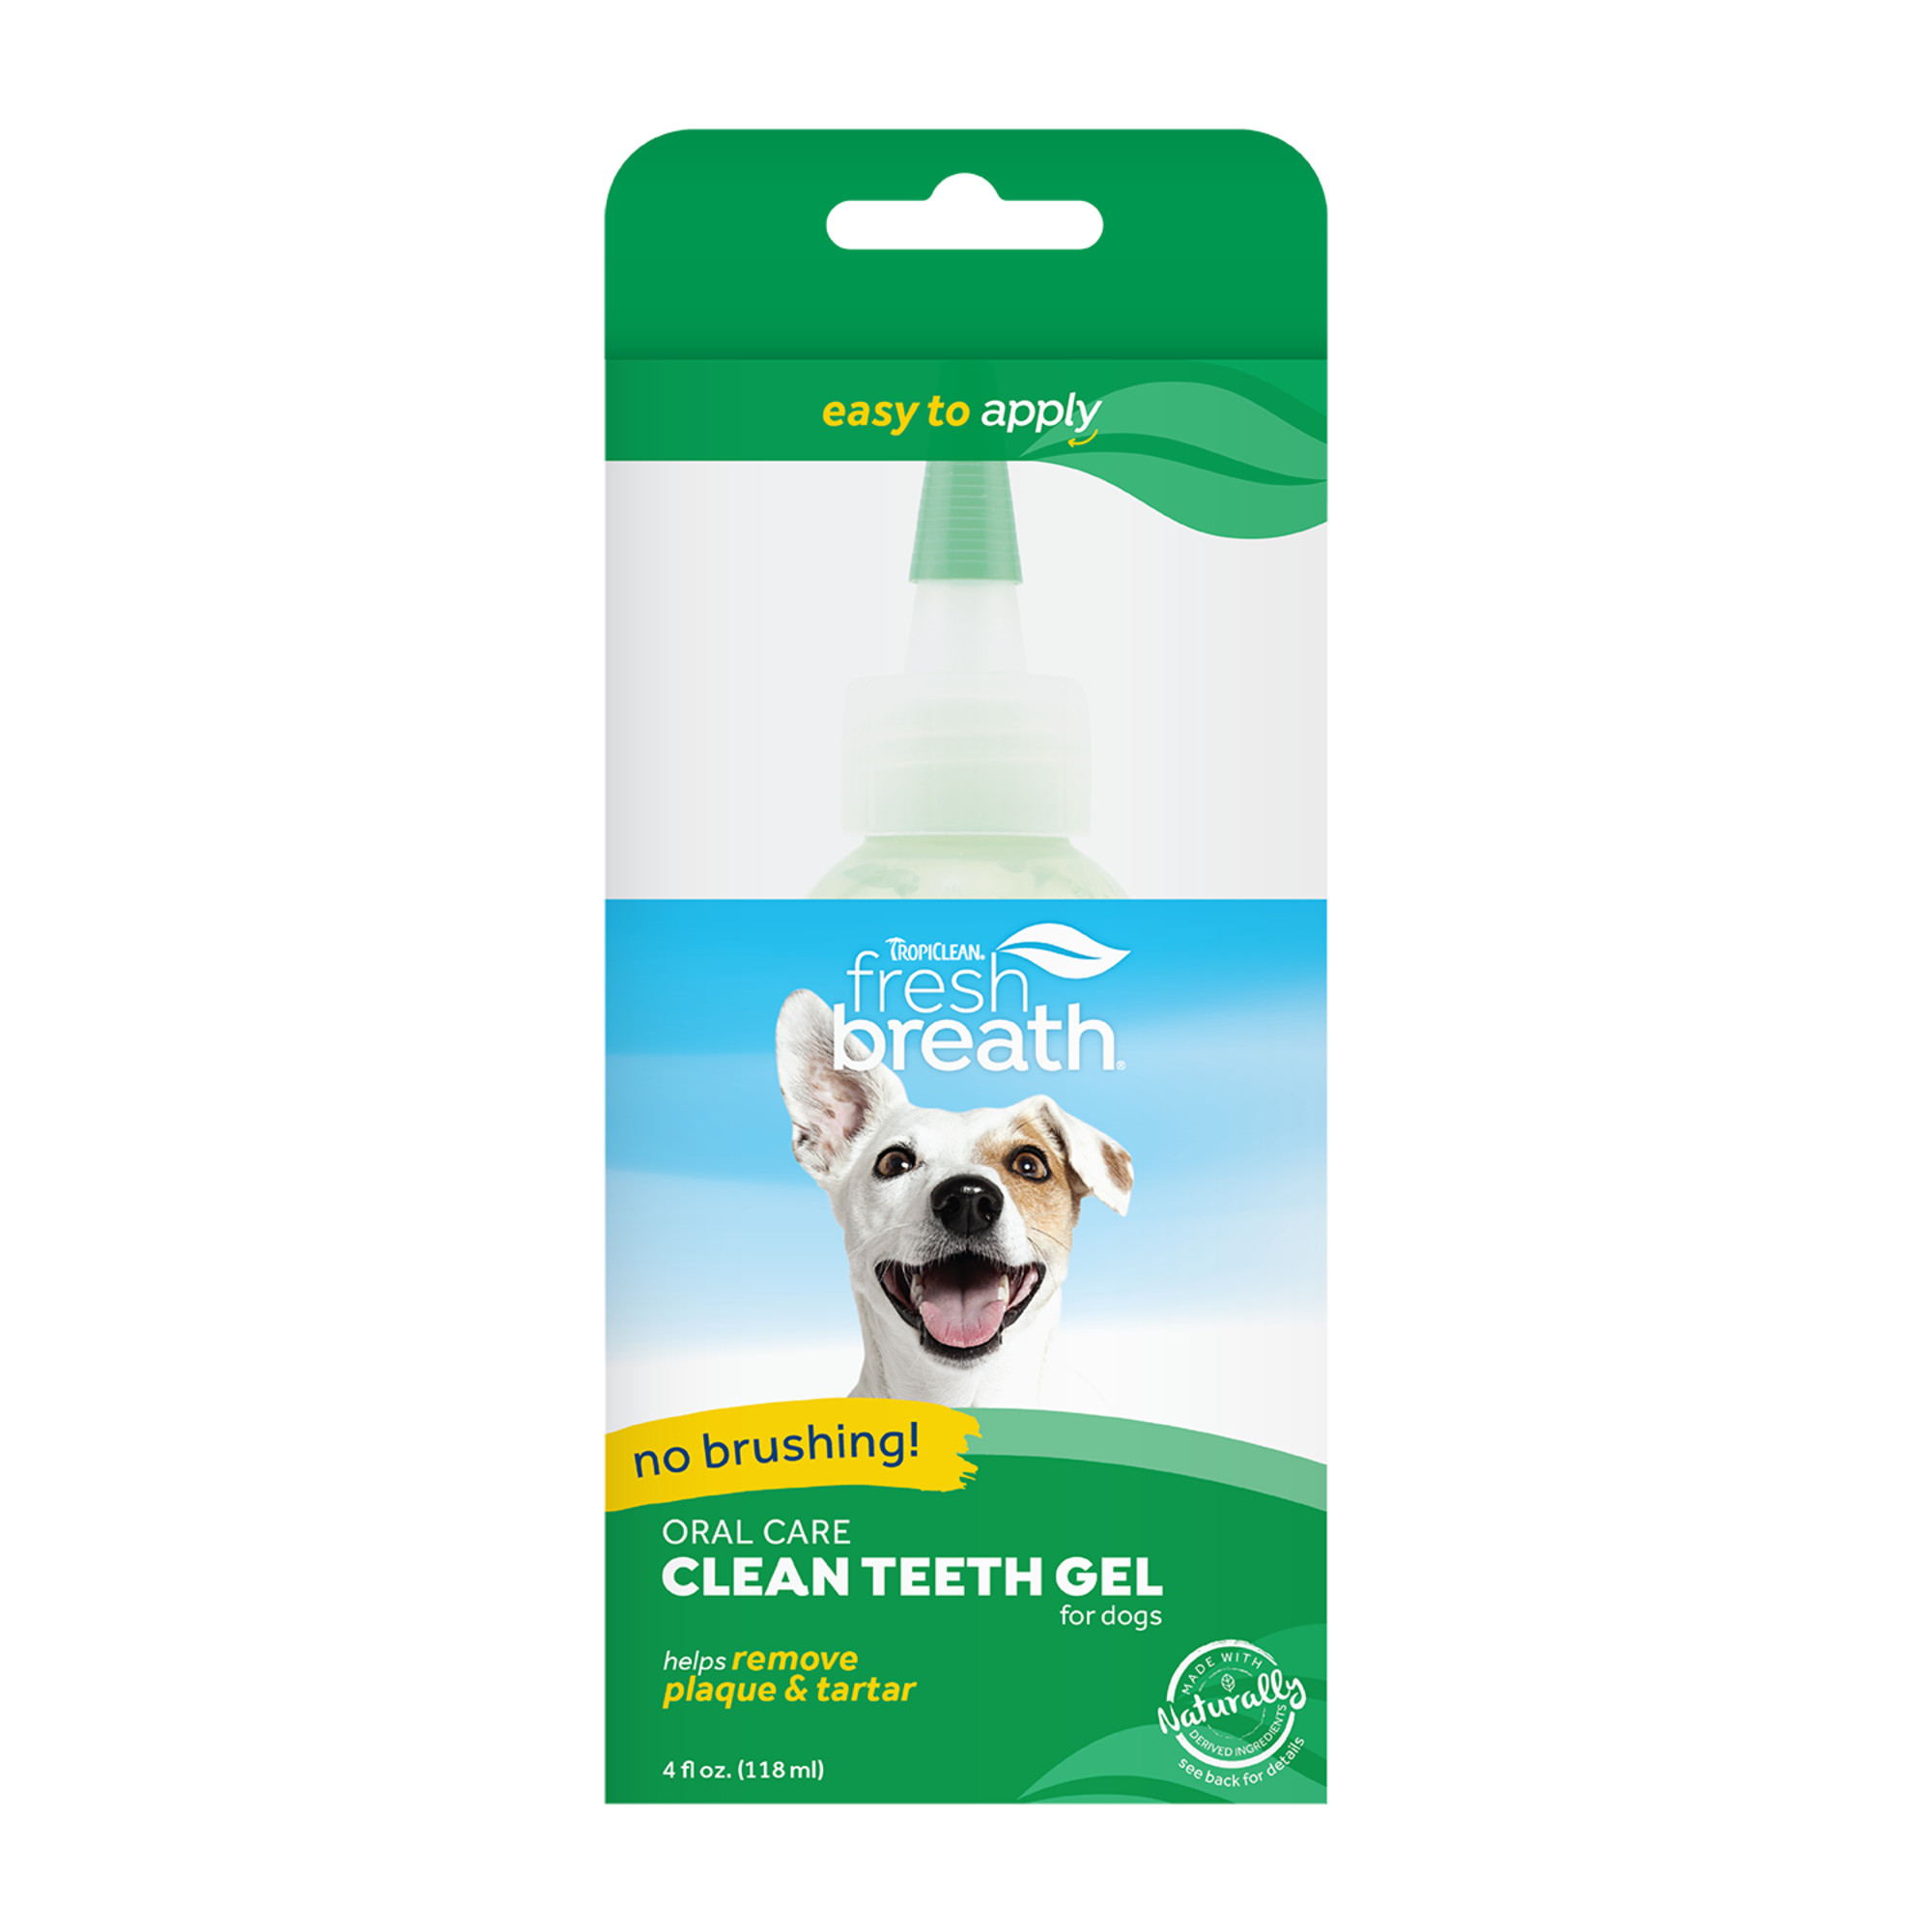 Oral Care Gel for Dogs